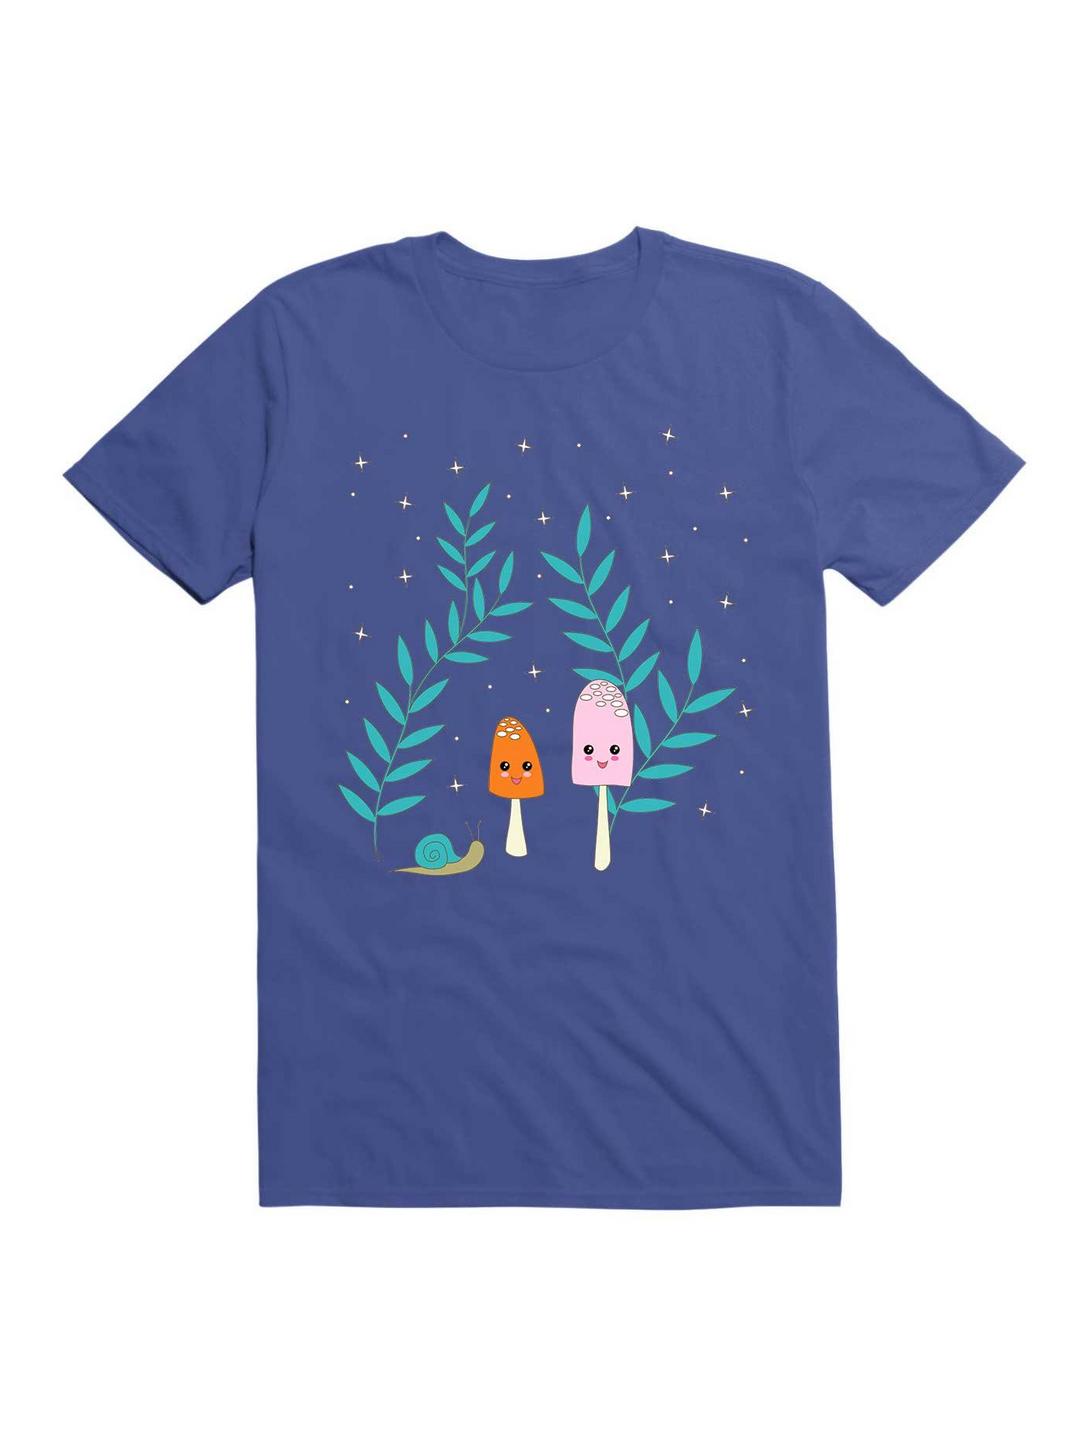 Kawaii Mushrooms In The Forest With Snail T-Shirt, ROYAL, hi-res